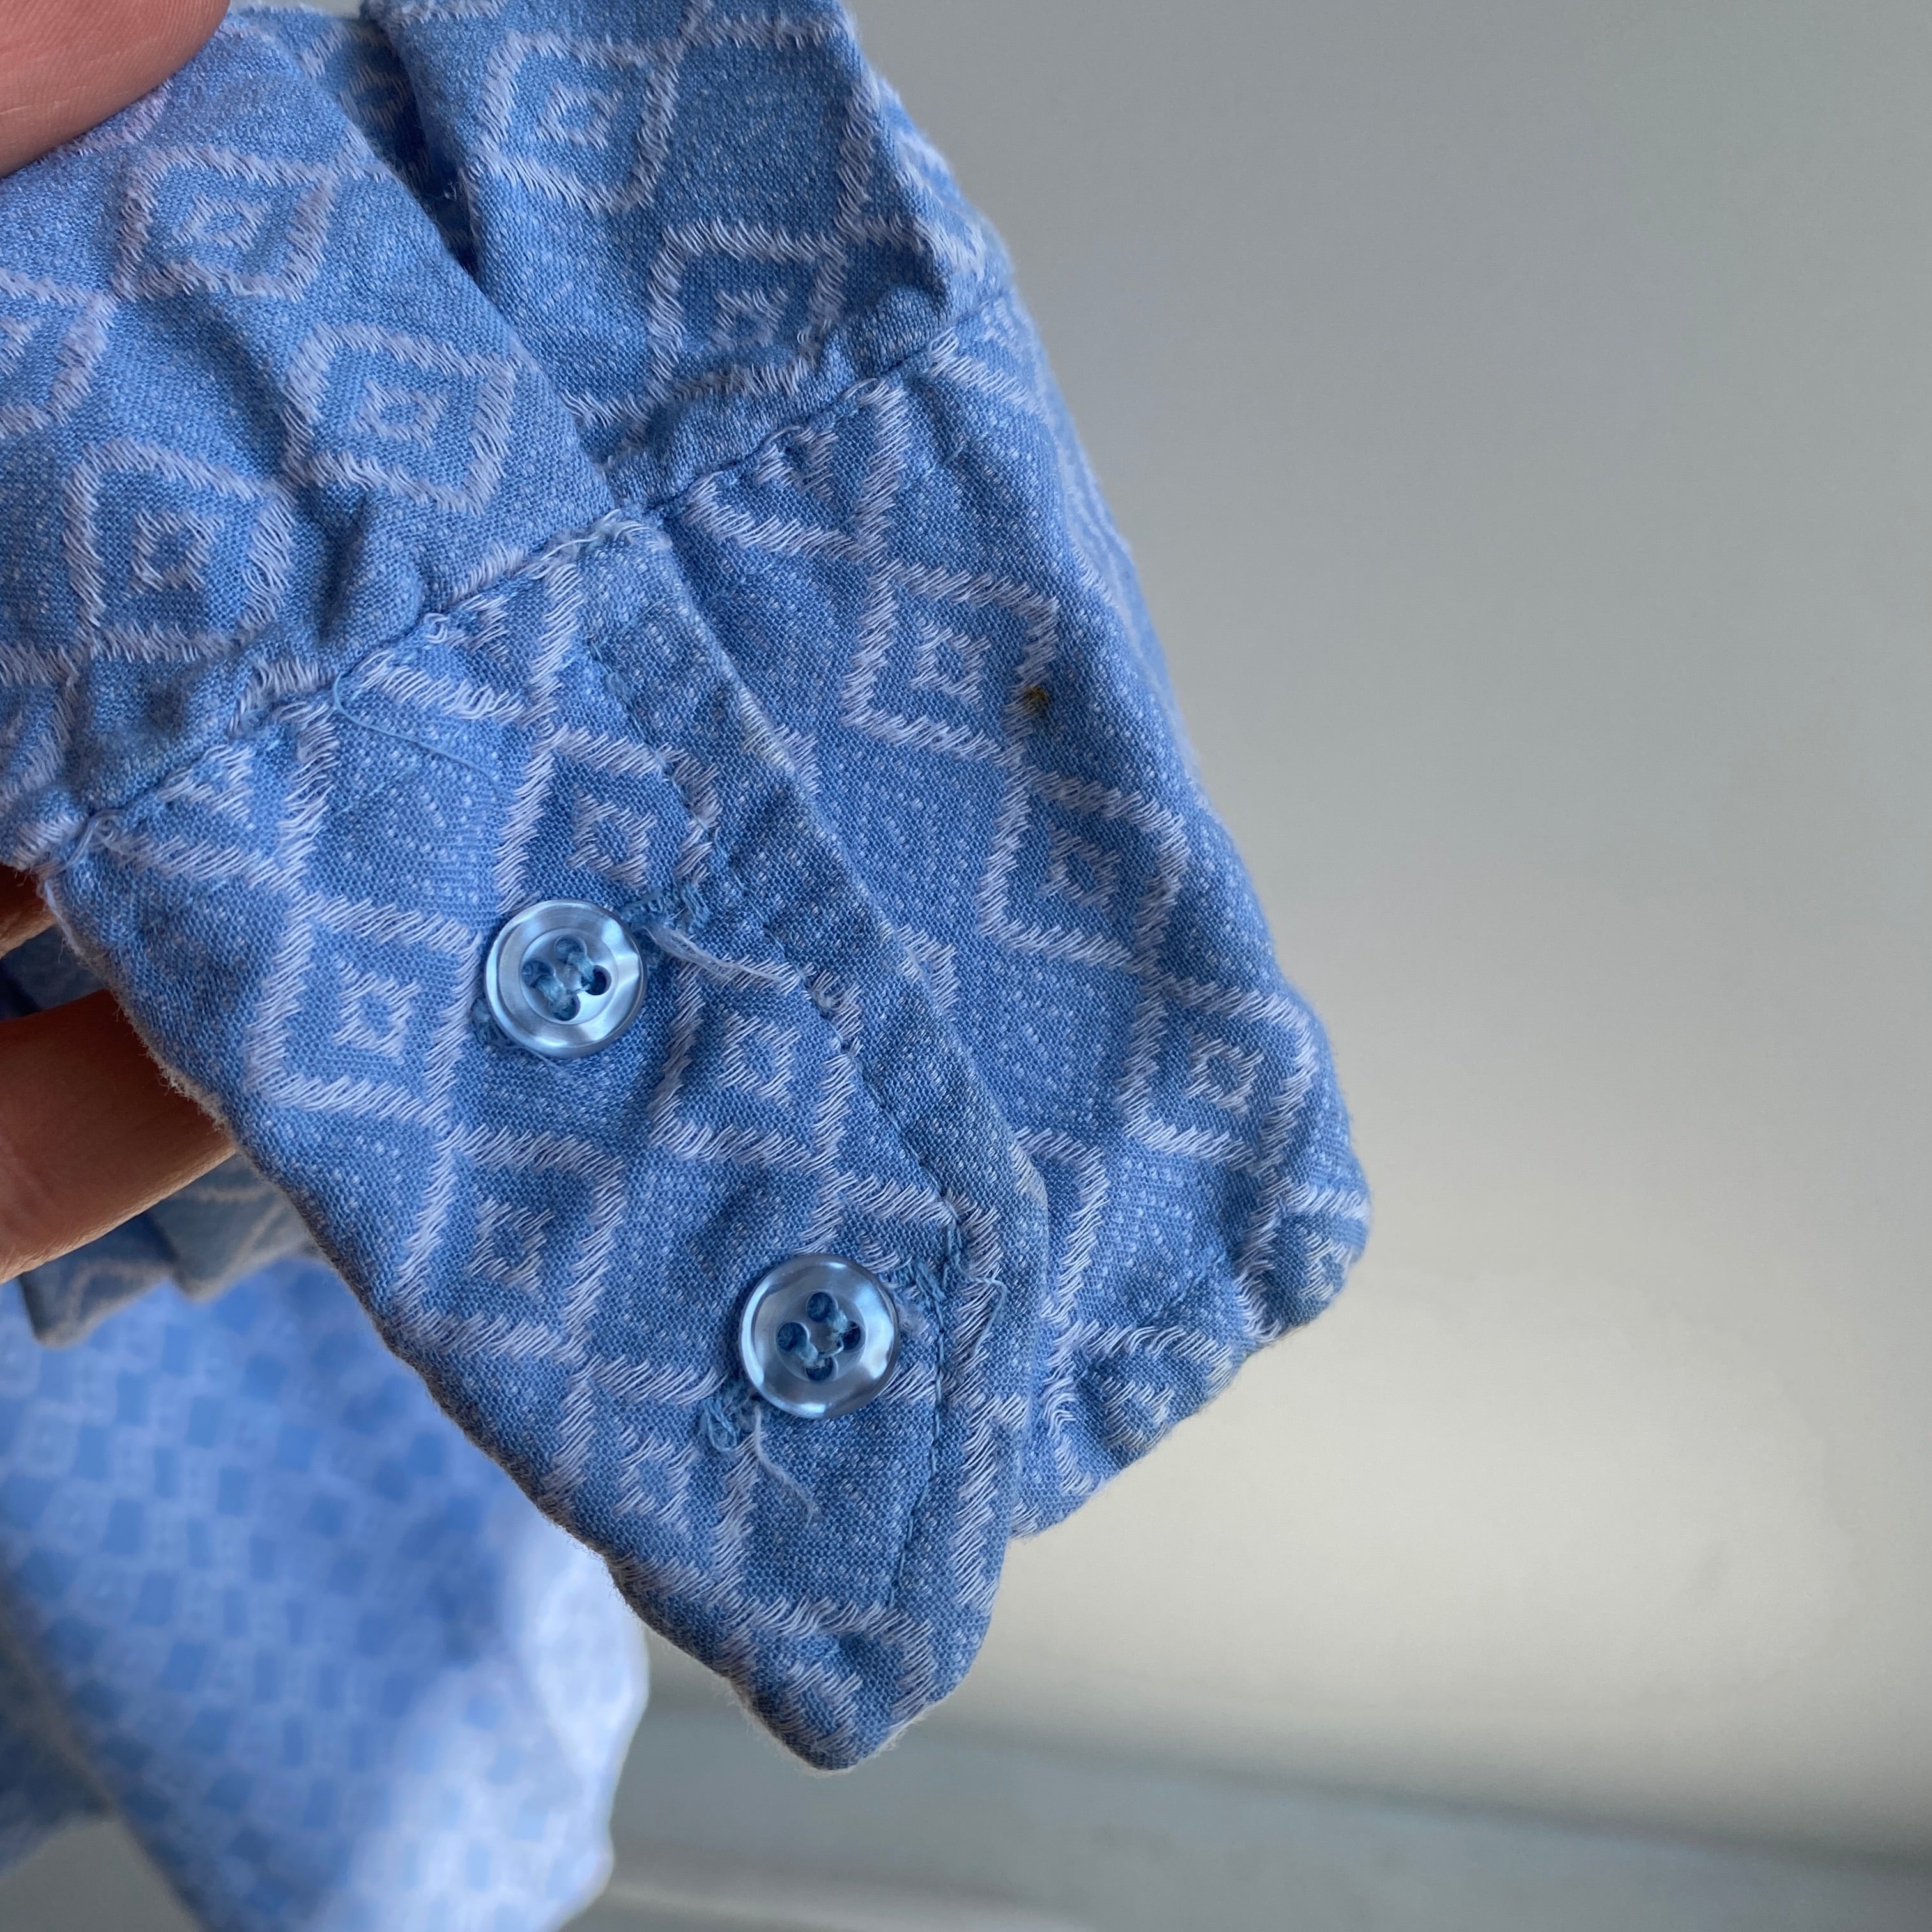 1970s Epic Baby Blue Button Down Shirt - The Collar!